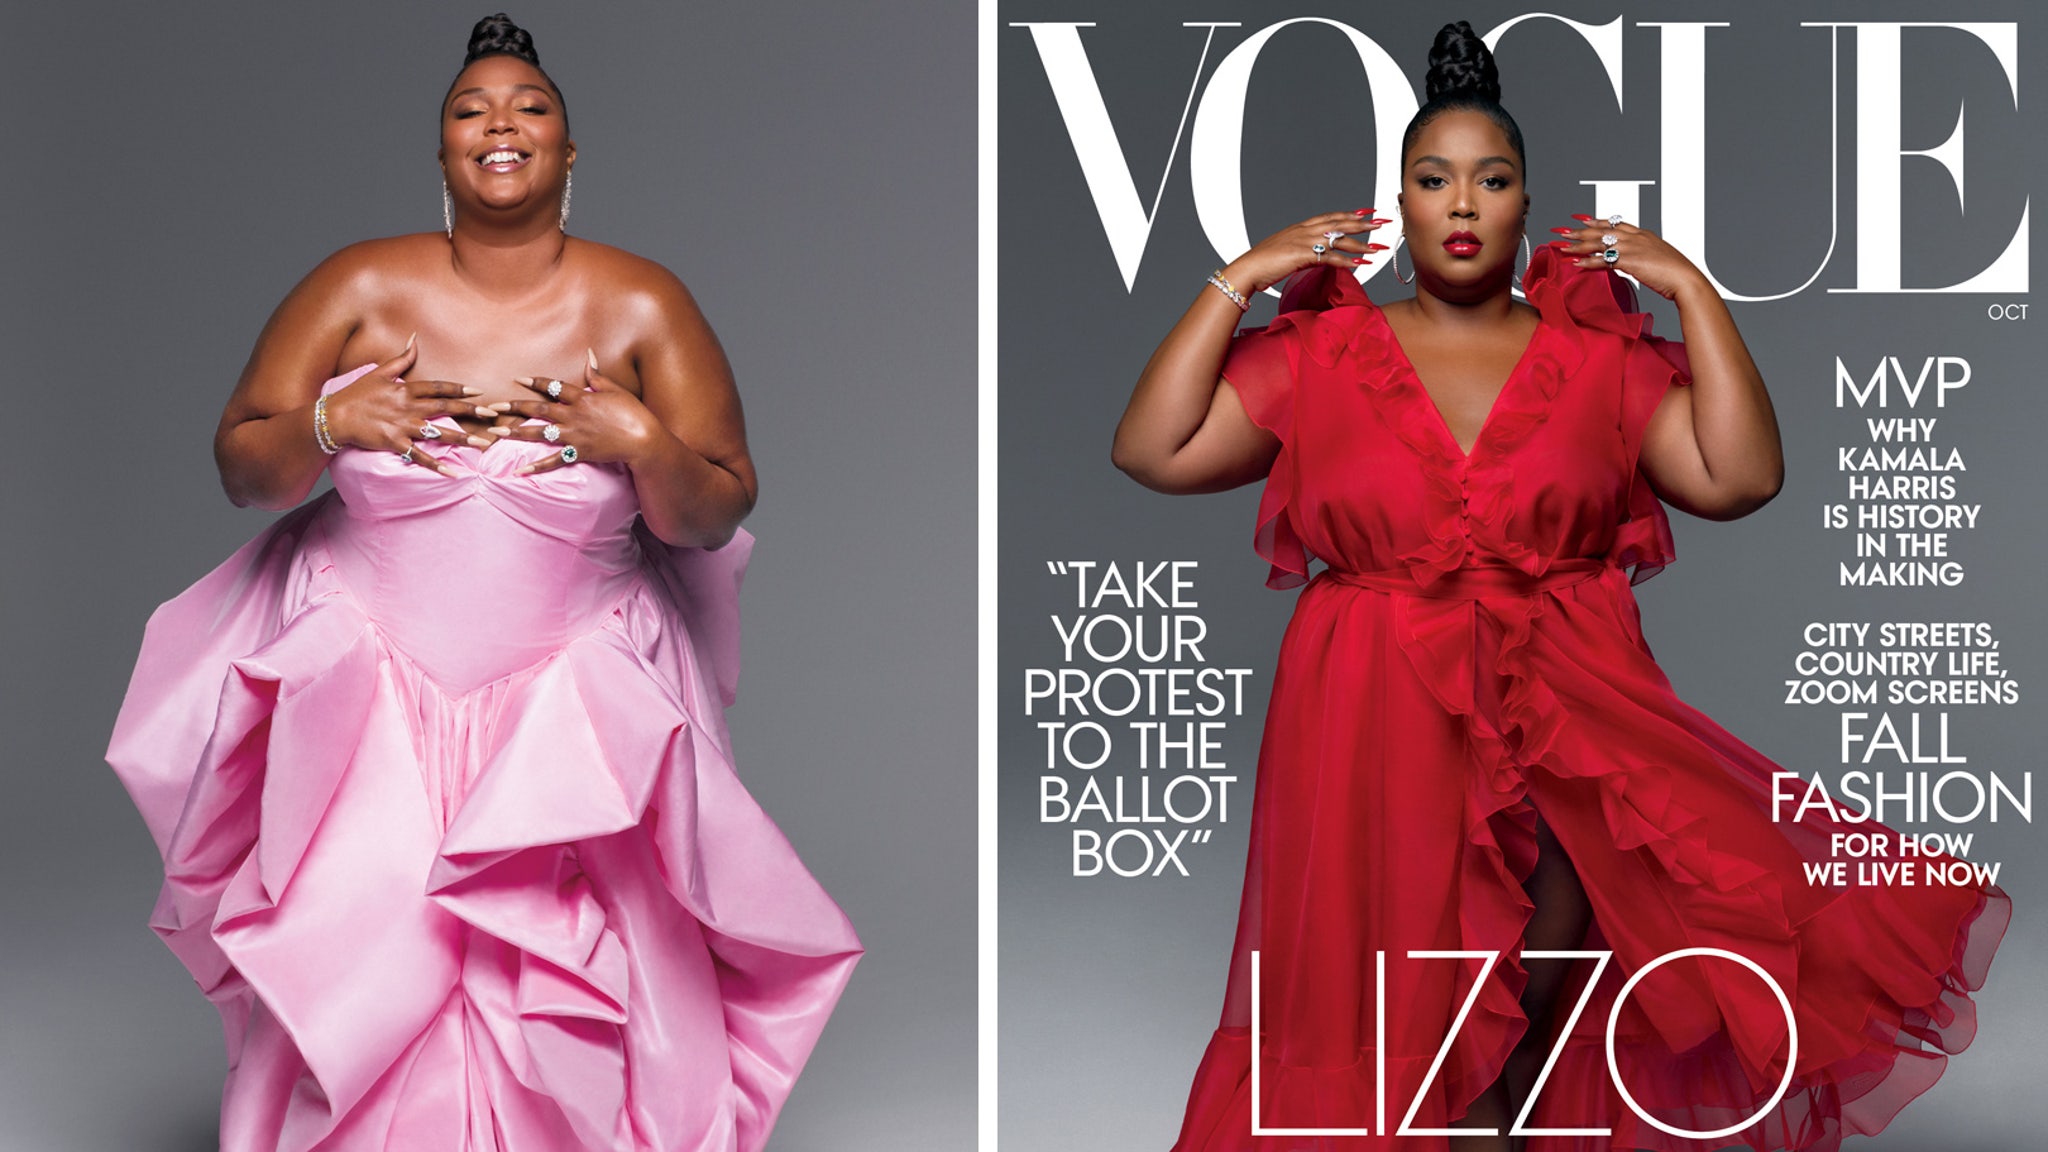 Lizzo covers Vogue, discusses the problem with body positivity